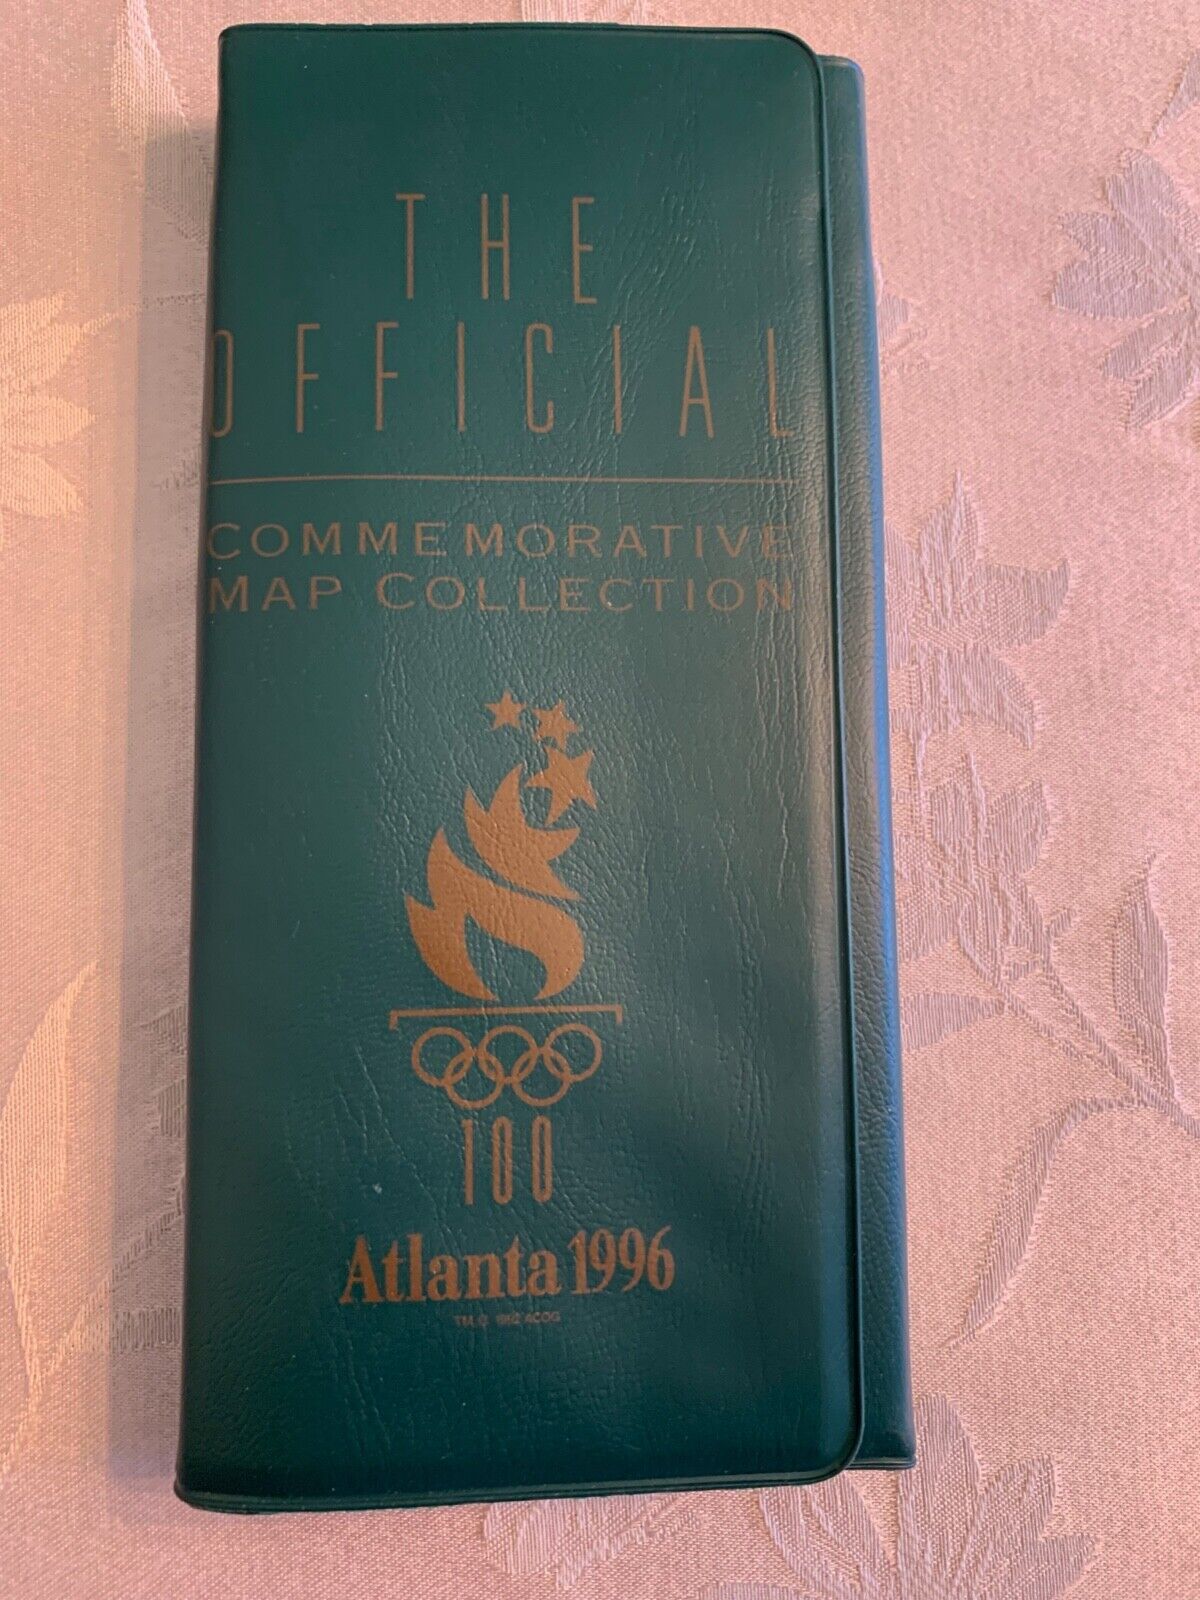 official commemorative map collection Atlanta 1996 Olympics with event tickets